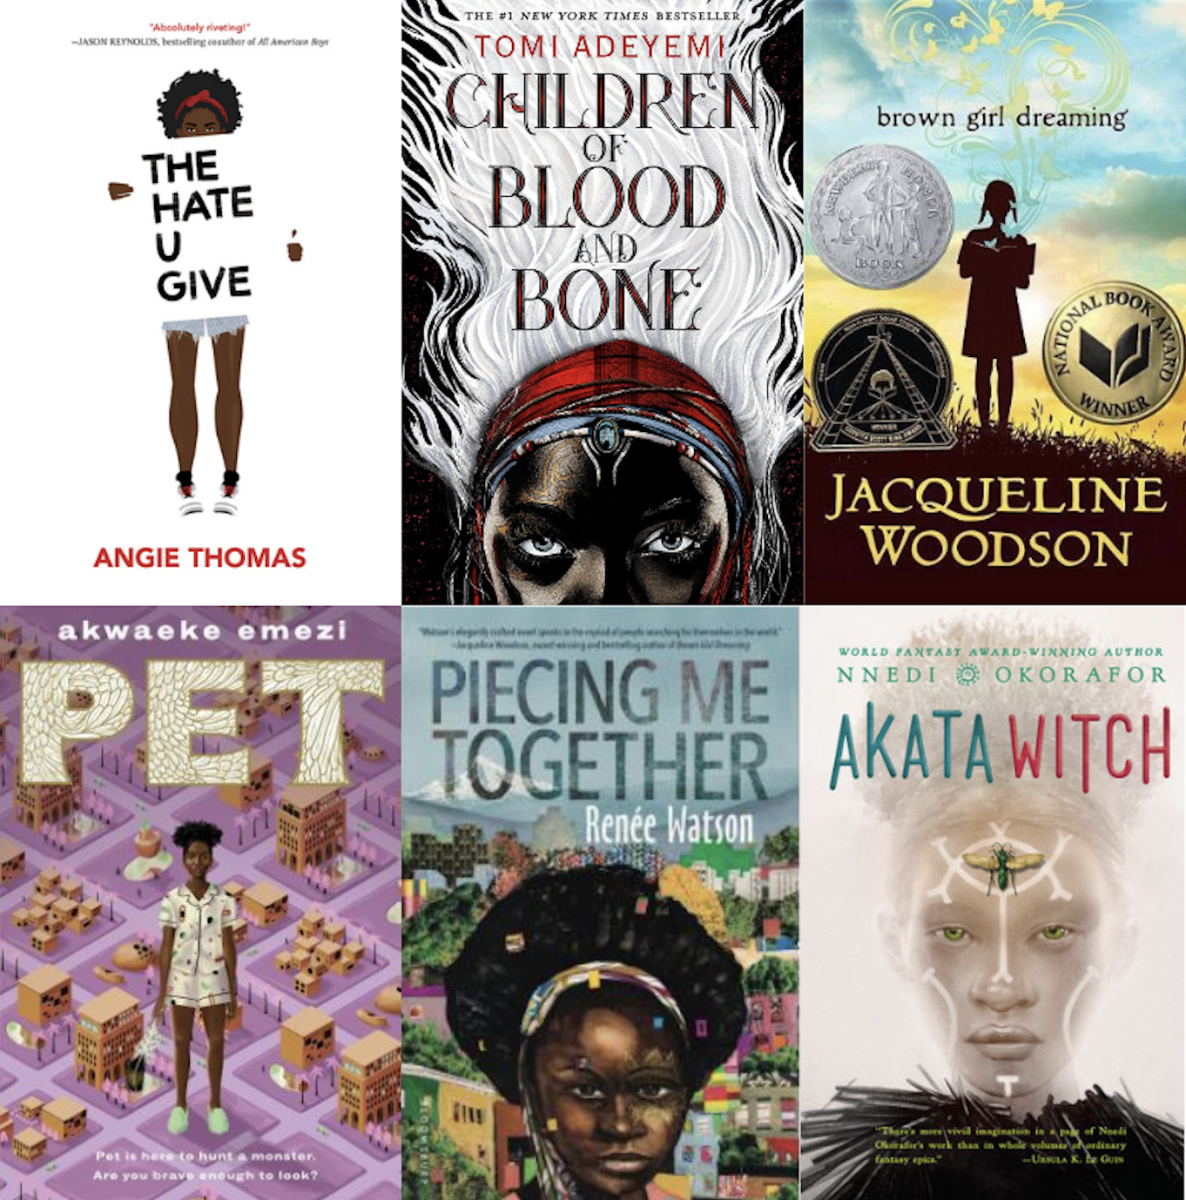 Top left to bottom right: The Hate U Give by Angie Thomas, Children of Blood and Bone by Tomi Adeyemi, Brown Girl Dreaming by Jacqueline Woodson, Pet by Akwaeke Emezi, Piecing Me Together by Renée Watson and Akata Witch by Nnedi Okorafor. (Courtesy of Goodreads)